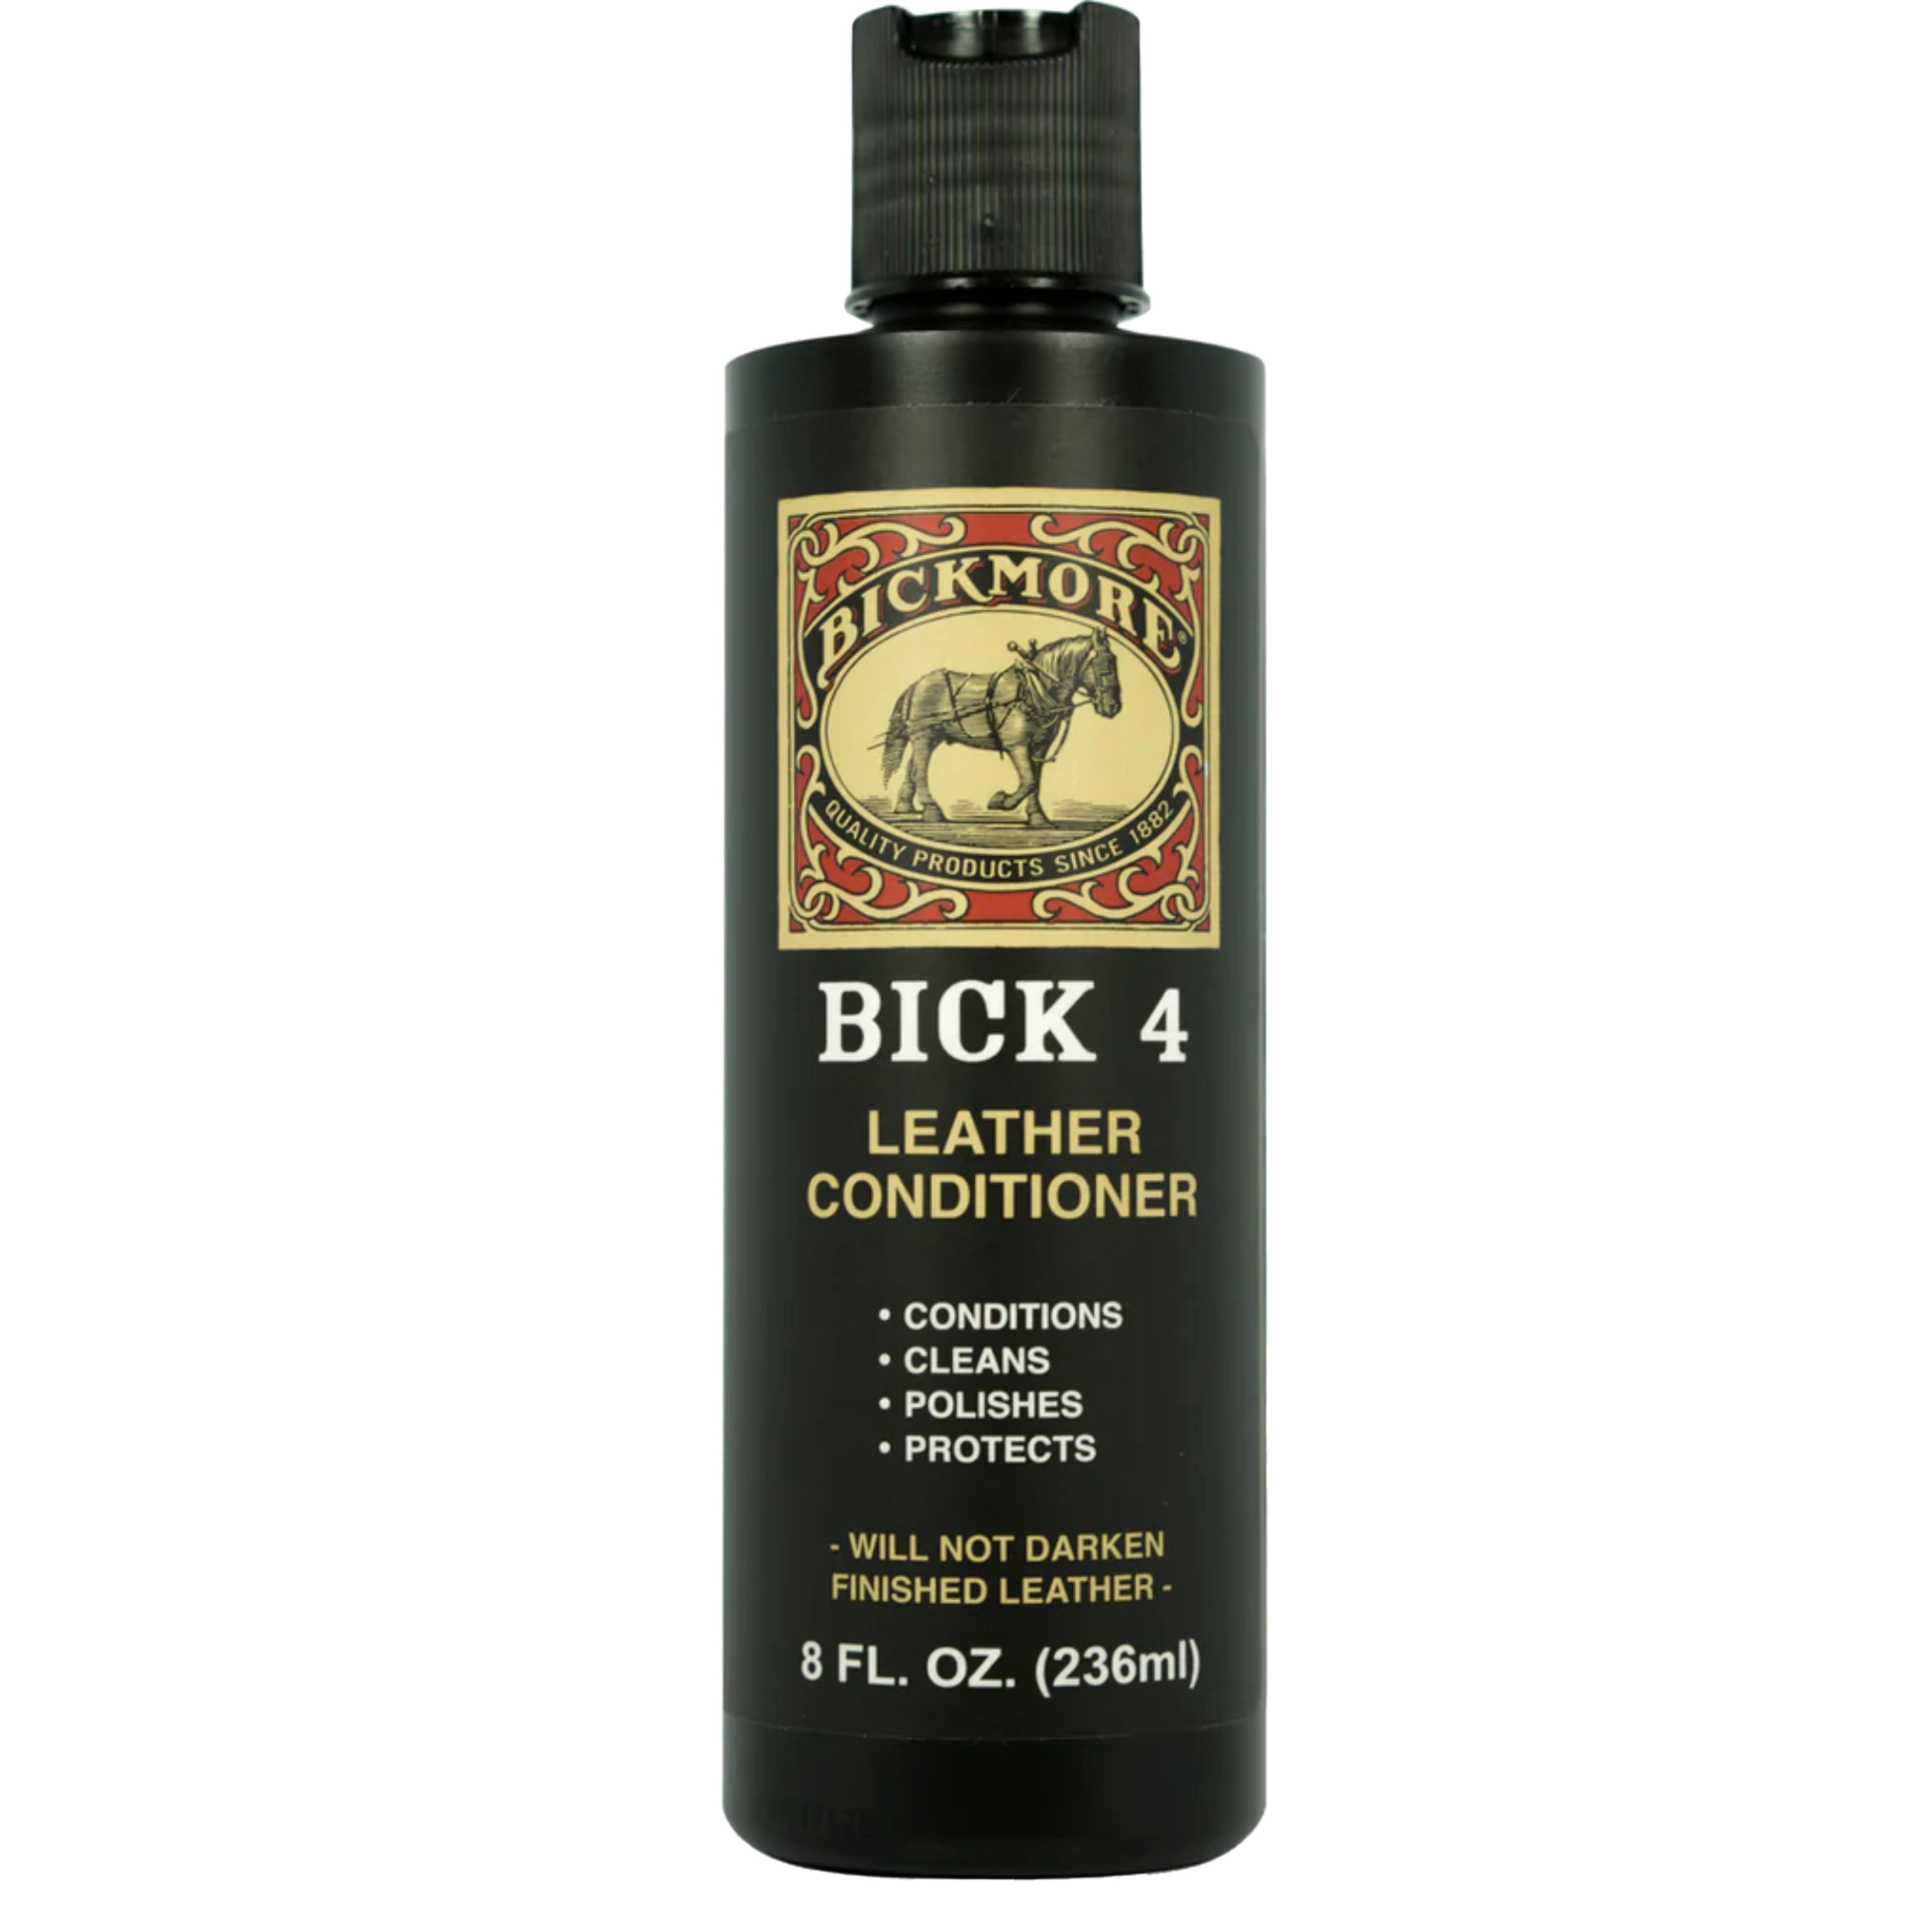 M&F Bickmore Boot Care 4: Leather Conditioner for New-Look Boots